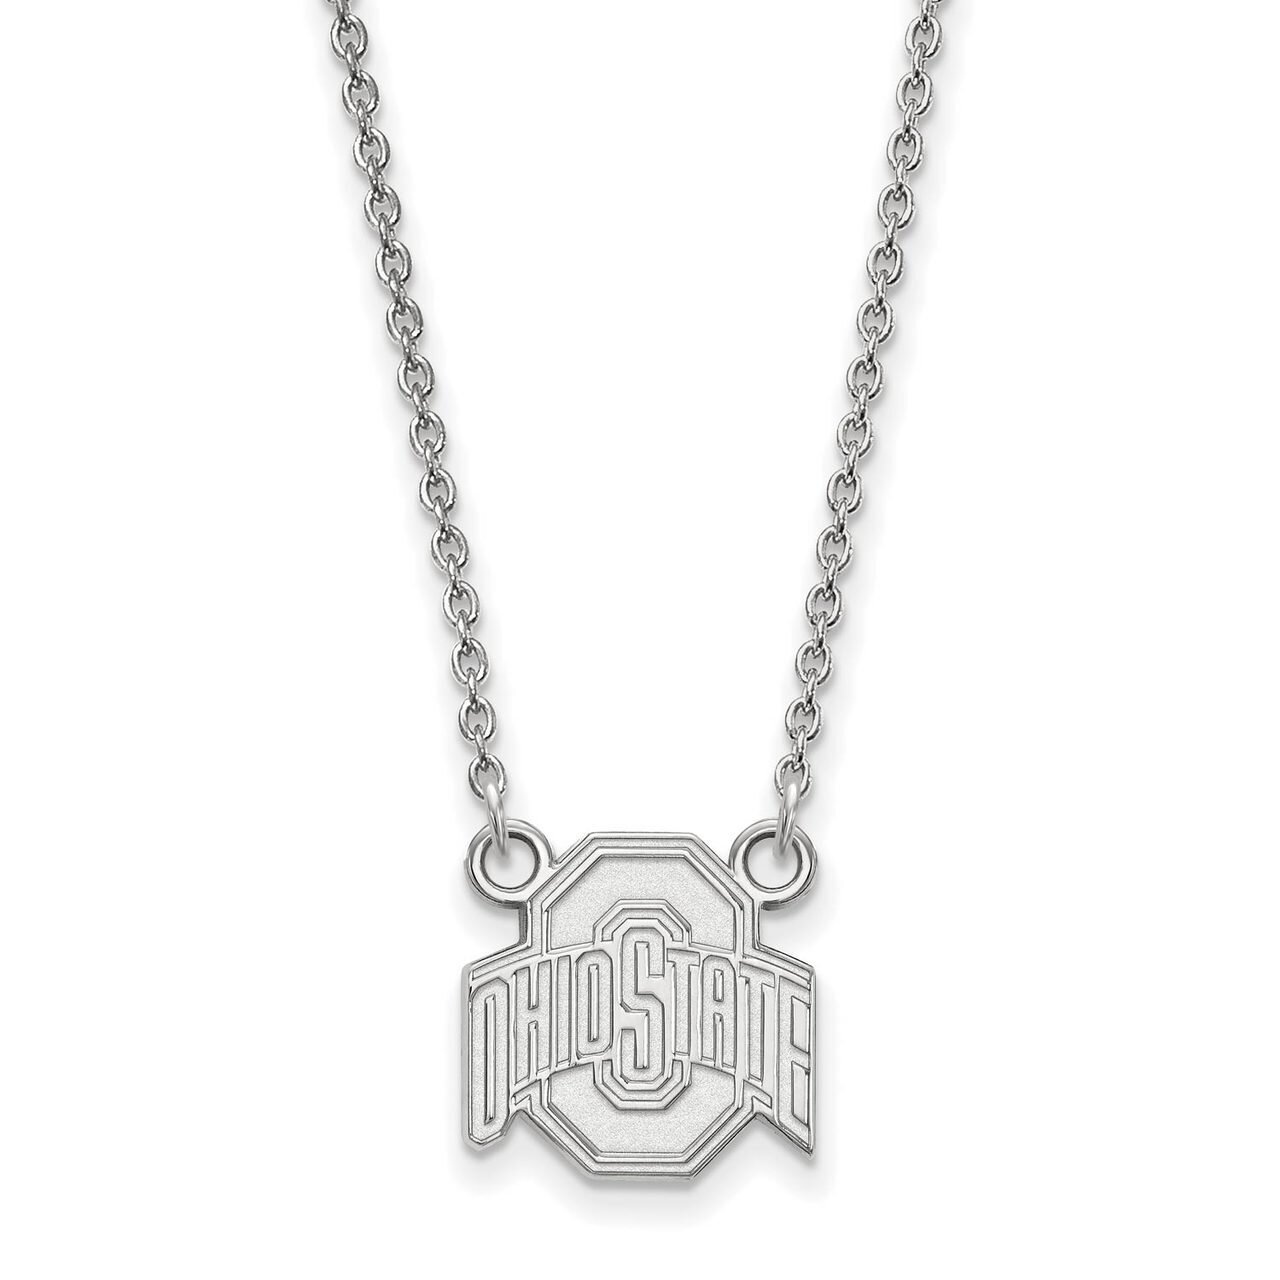 Ohio State University Small Pendant with Chain Necklace 14k White Gold 4W015OSU-18